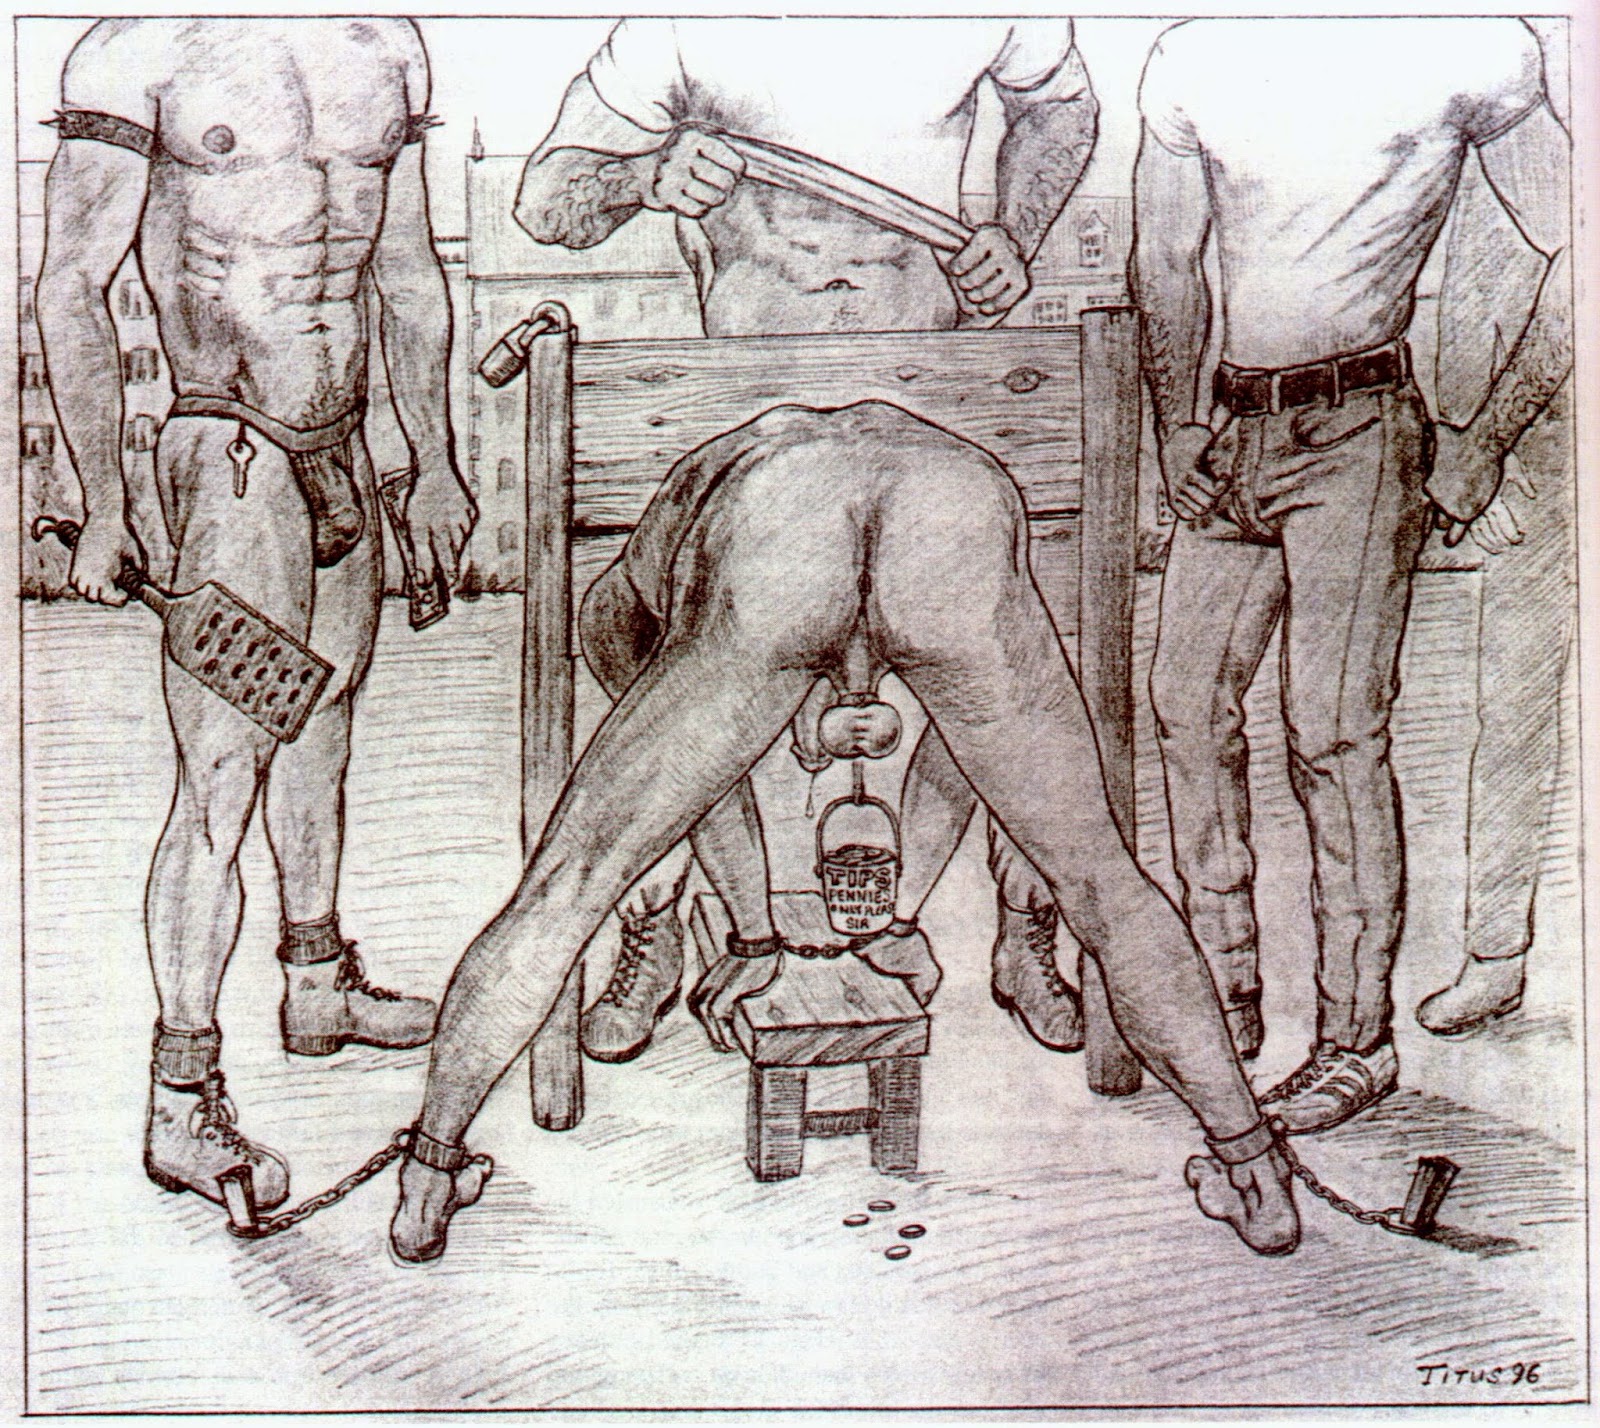 Painal in medieval torture pillory